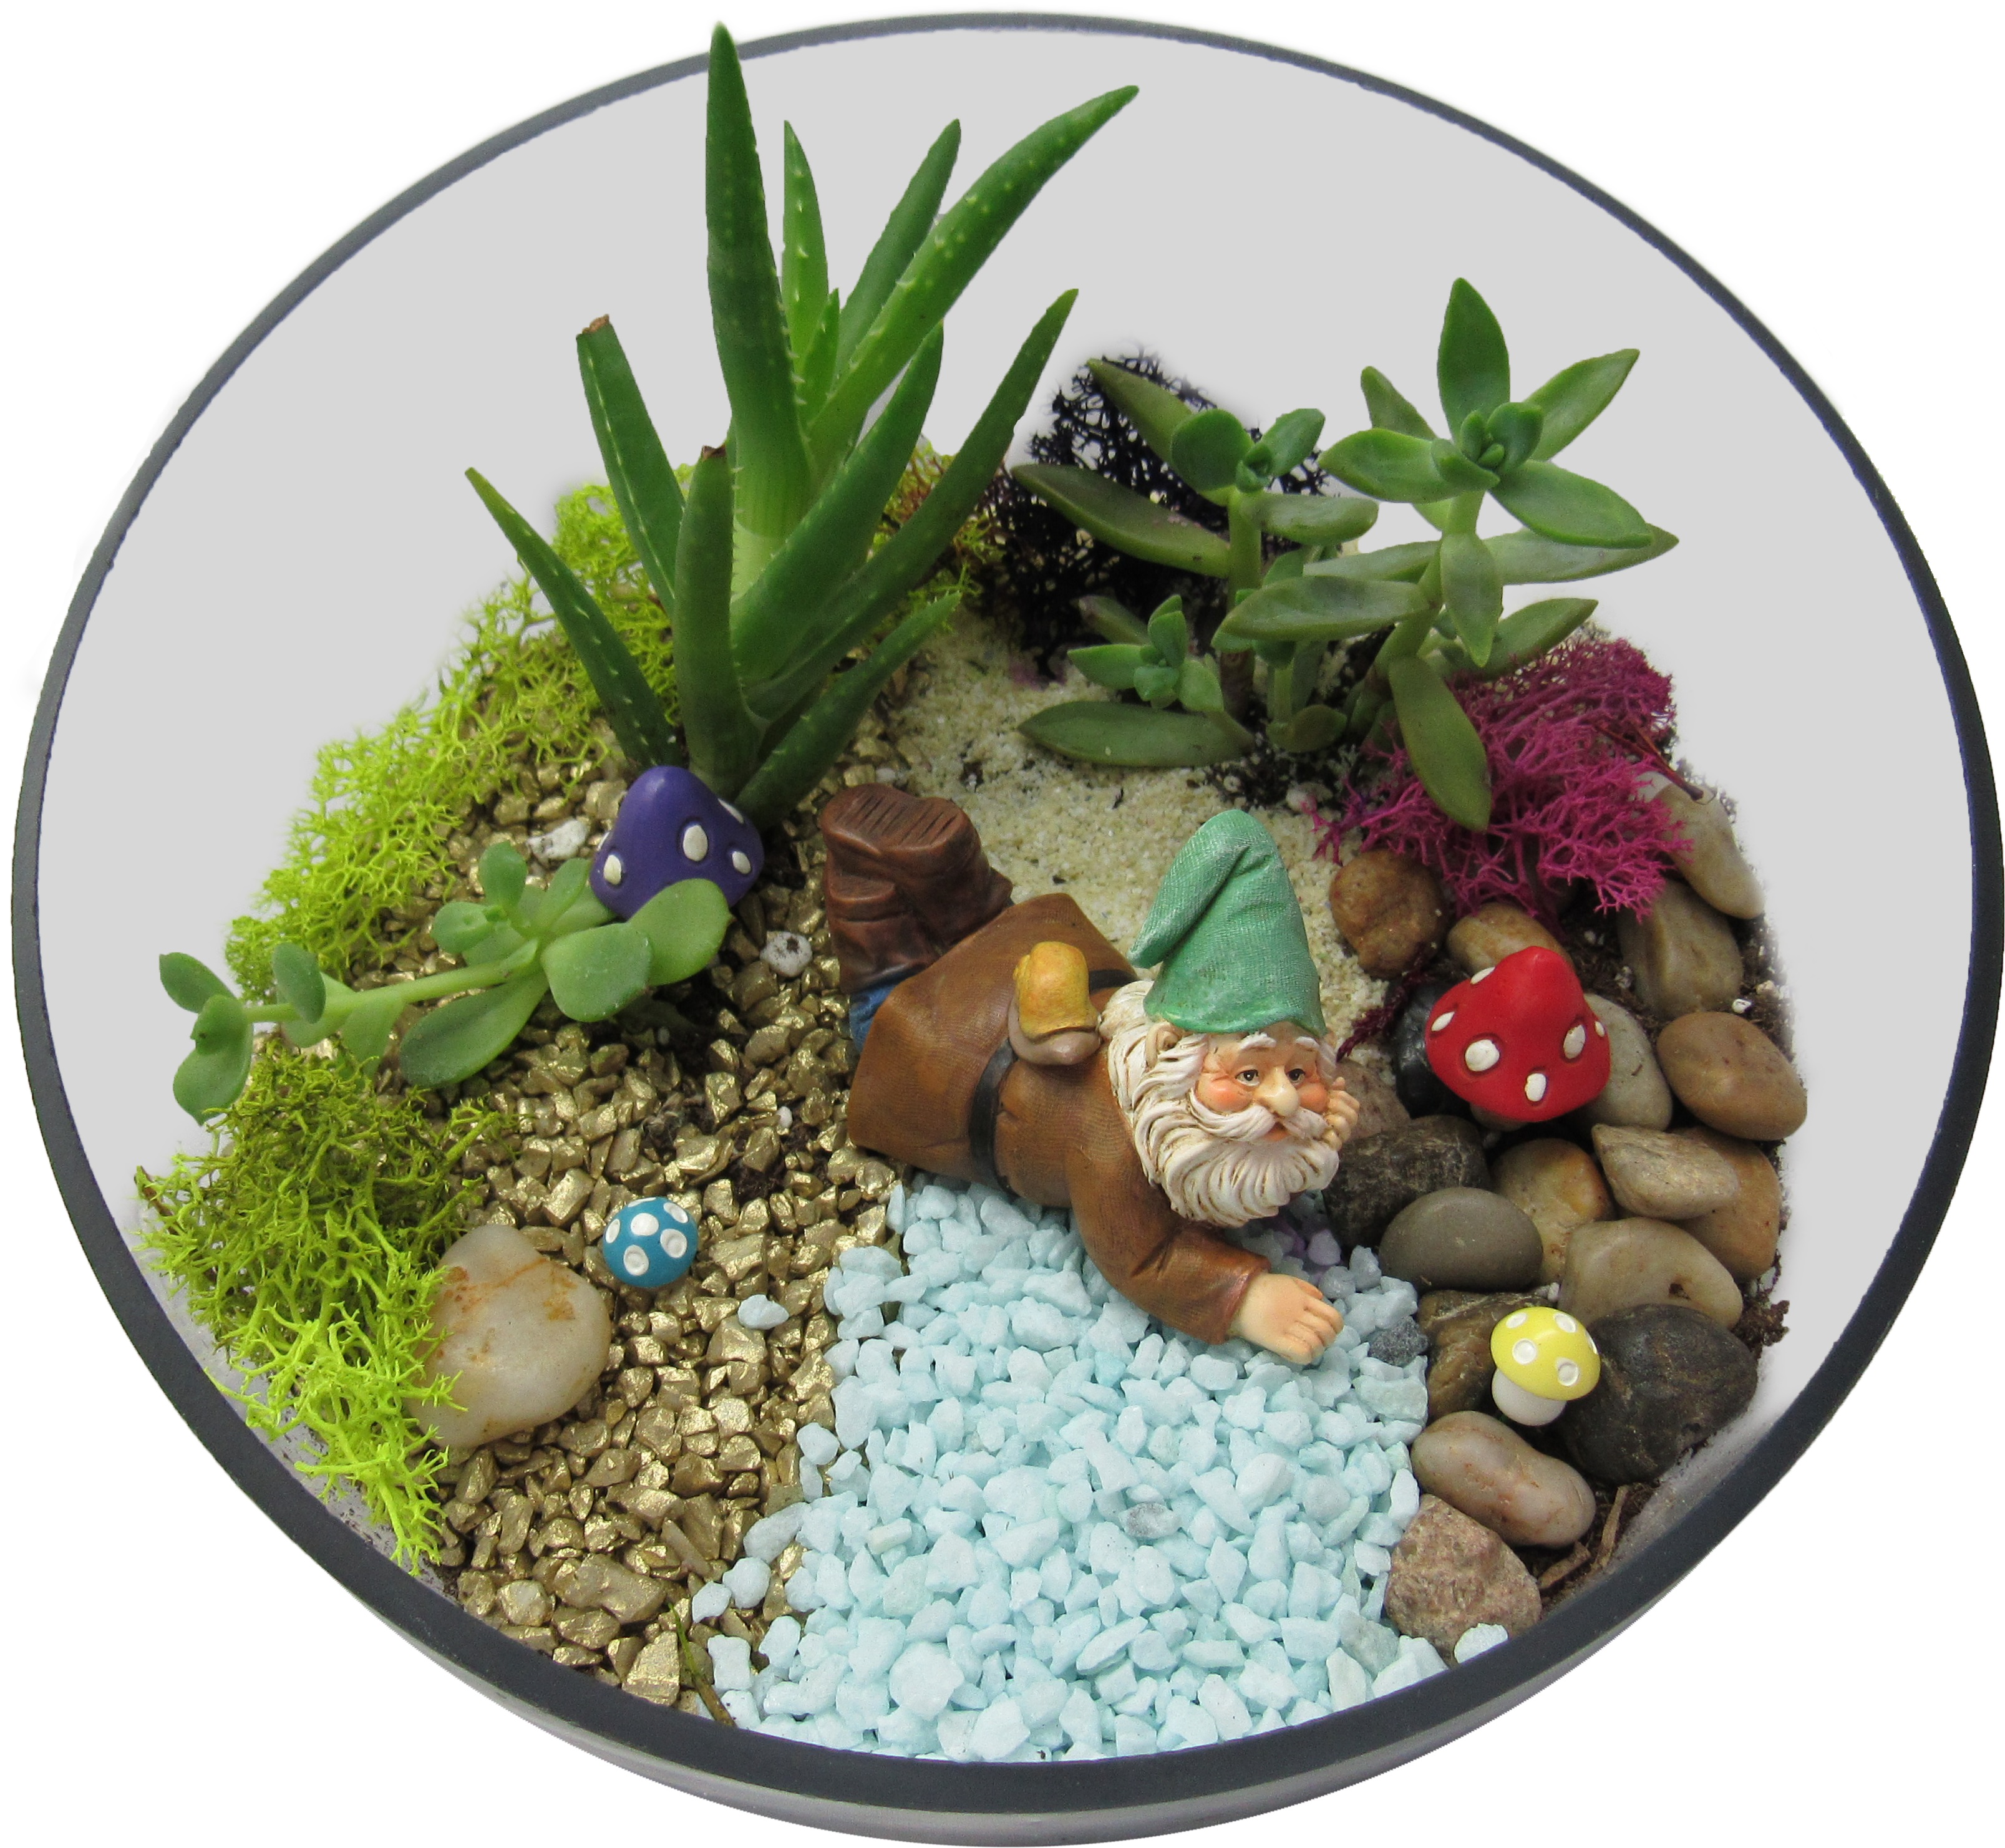 A Succulent Gnome Mushroom Terrarium plant nite project by Yaymaker